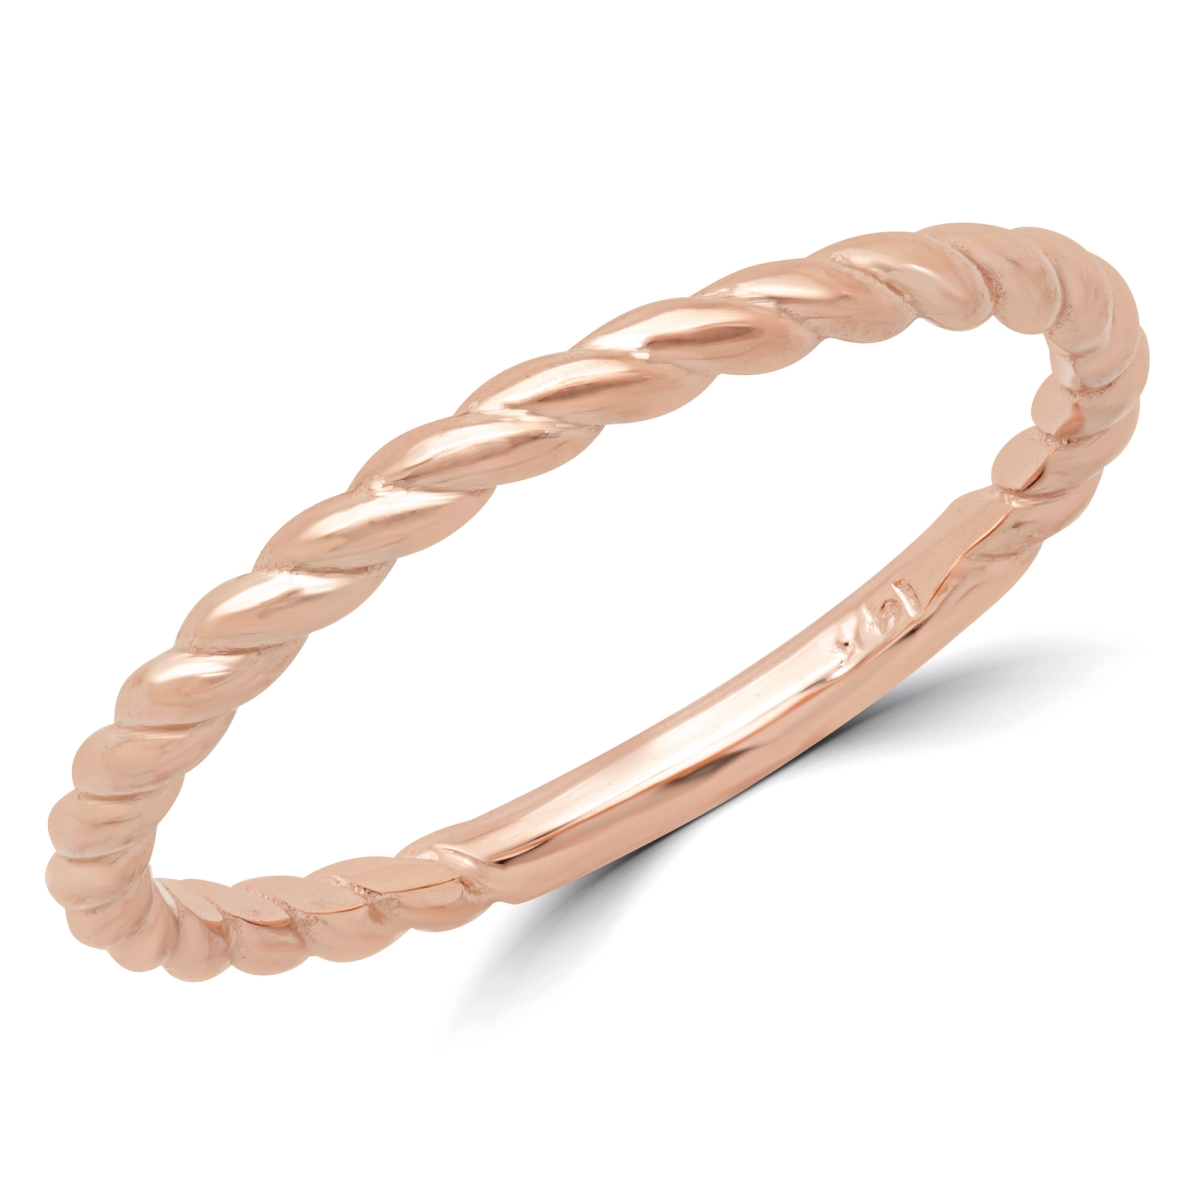 Picture of Majesty Diamonds MD180603-7 Braided Rope Classic Wedding Band Ring in 14K Rose Gold - Size 7